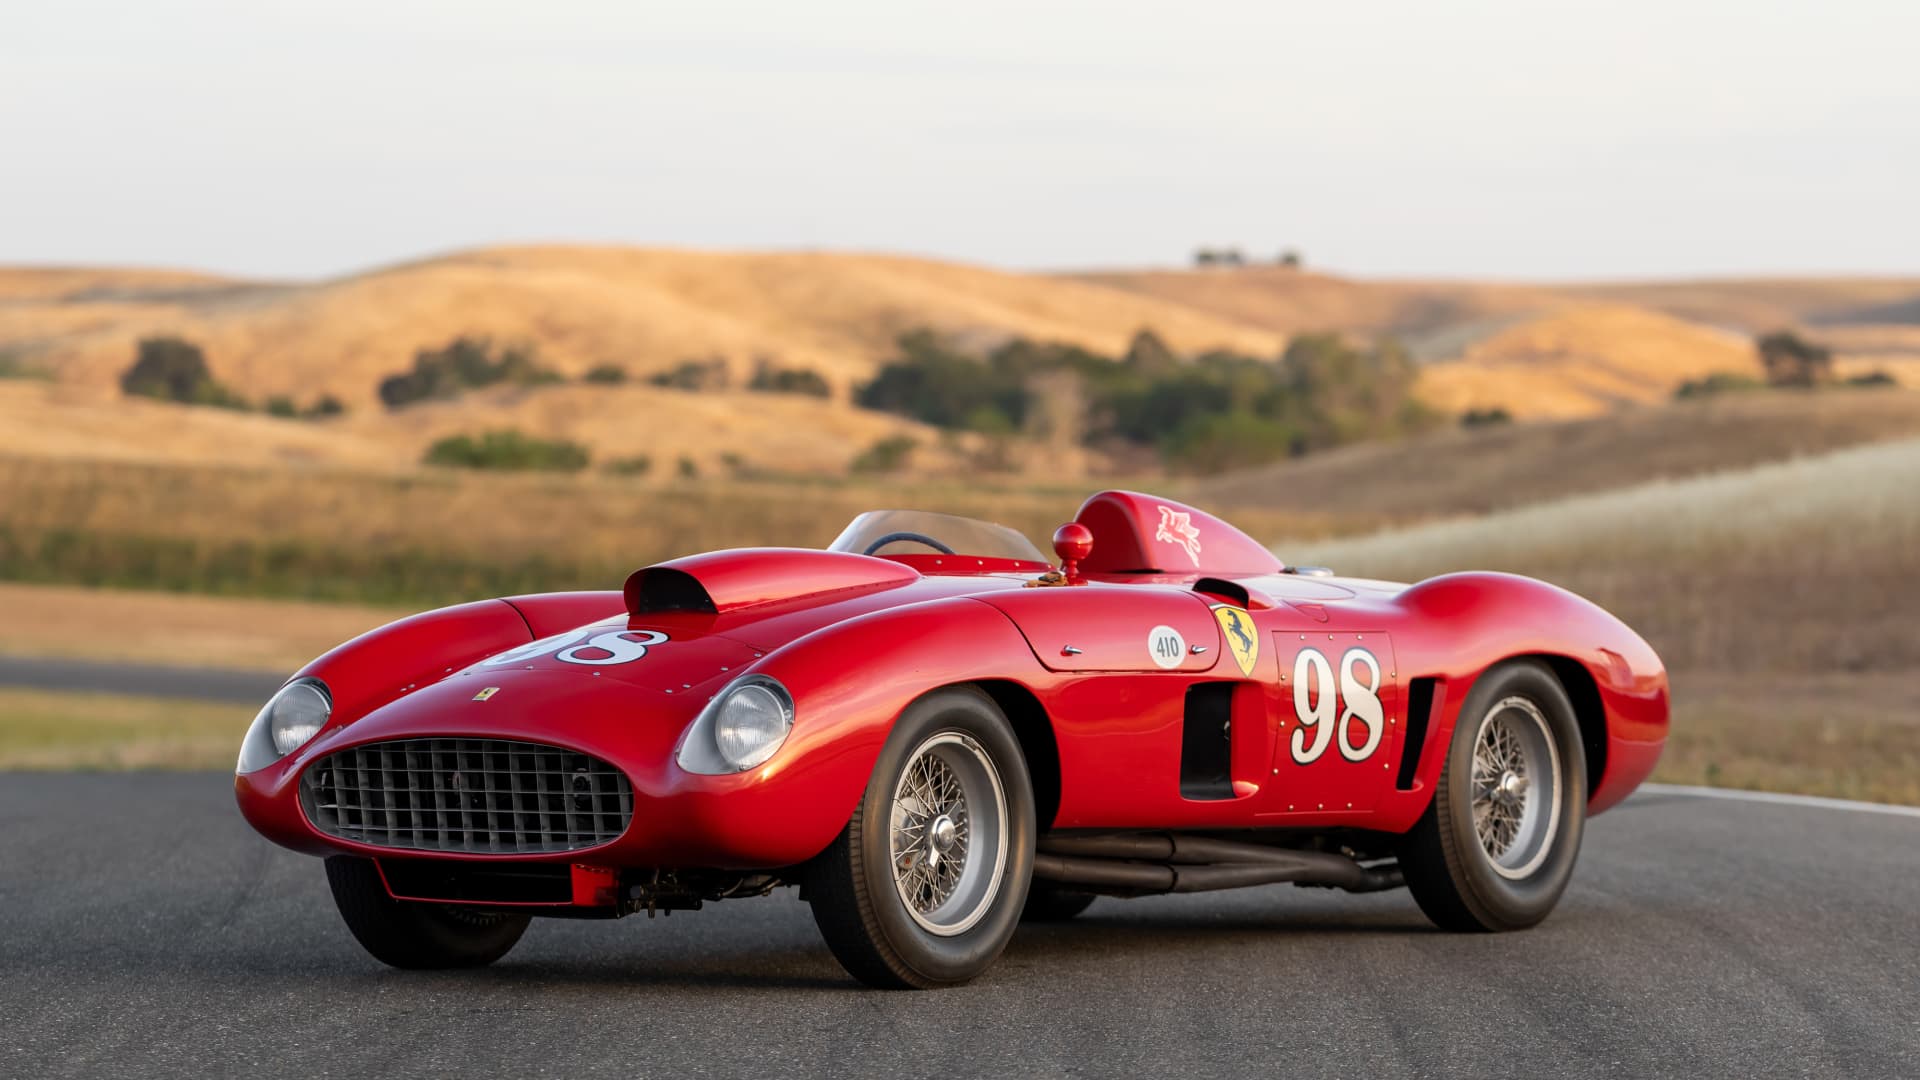 Classic car auctions in Monterey score a record 9 million